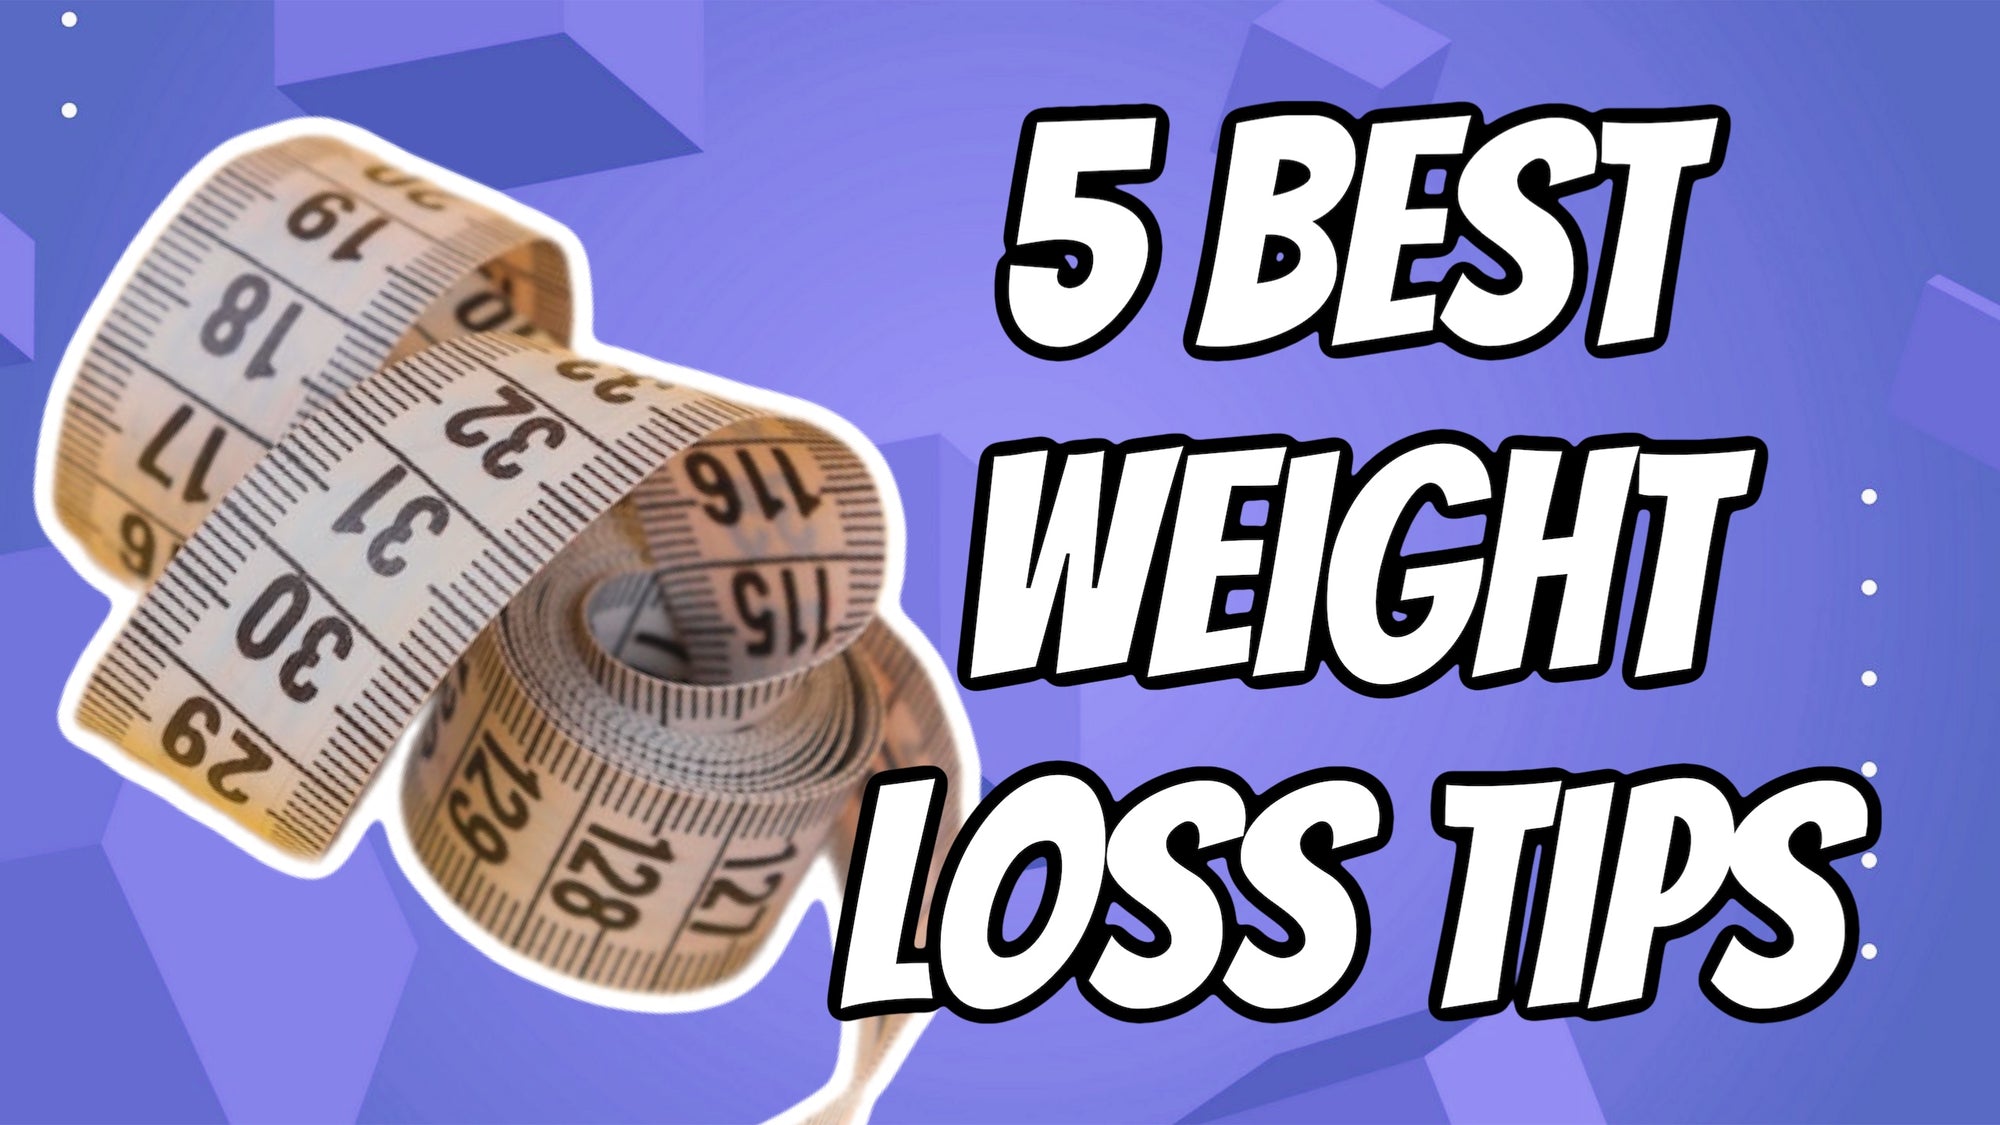 5 Best Weight Loss Tips For Overweight Men: Why You Should Lose Weight